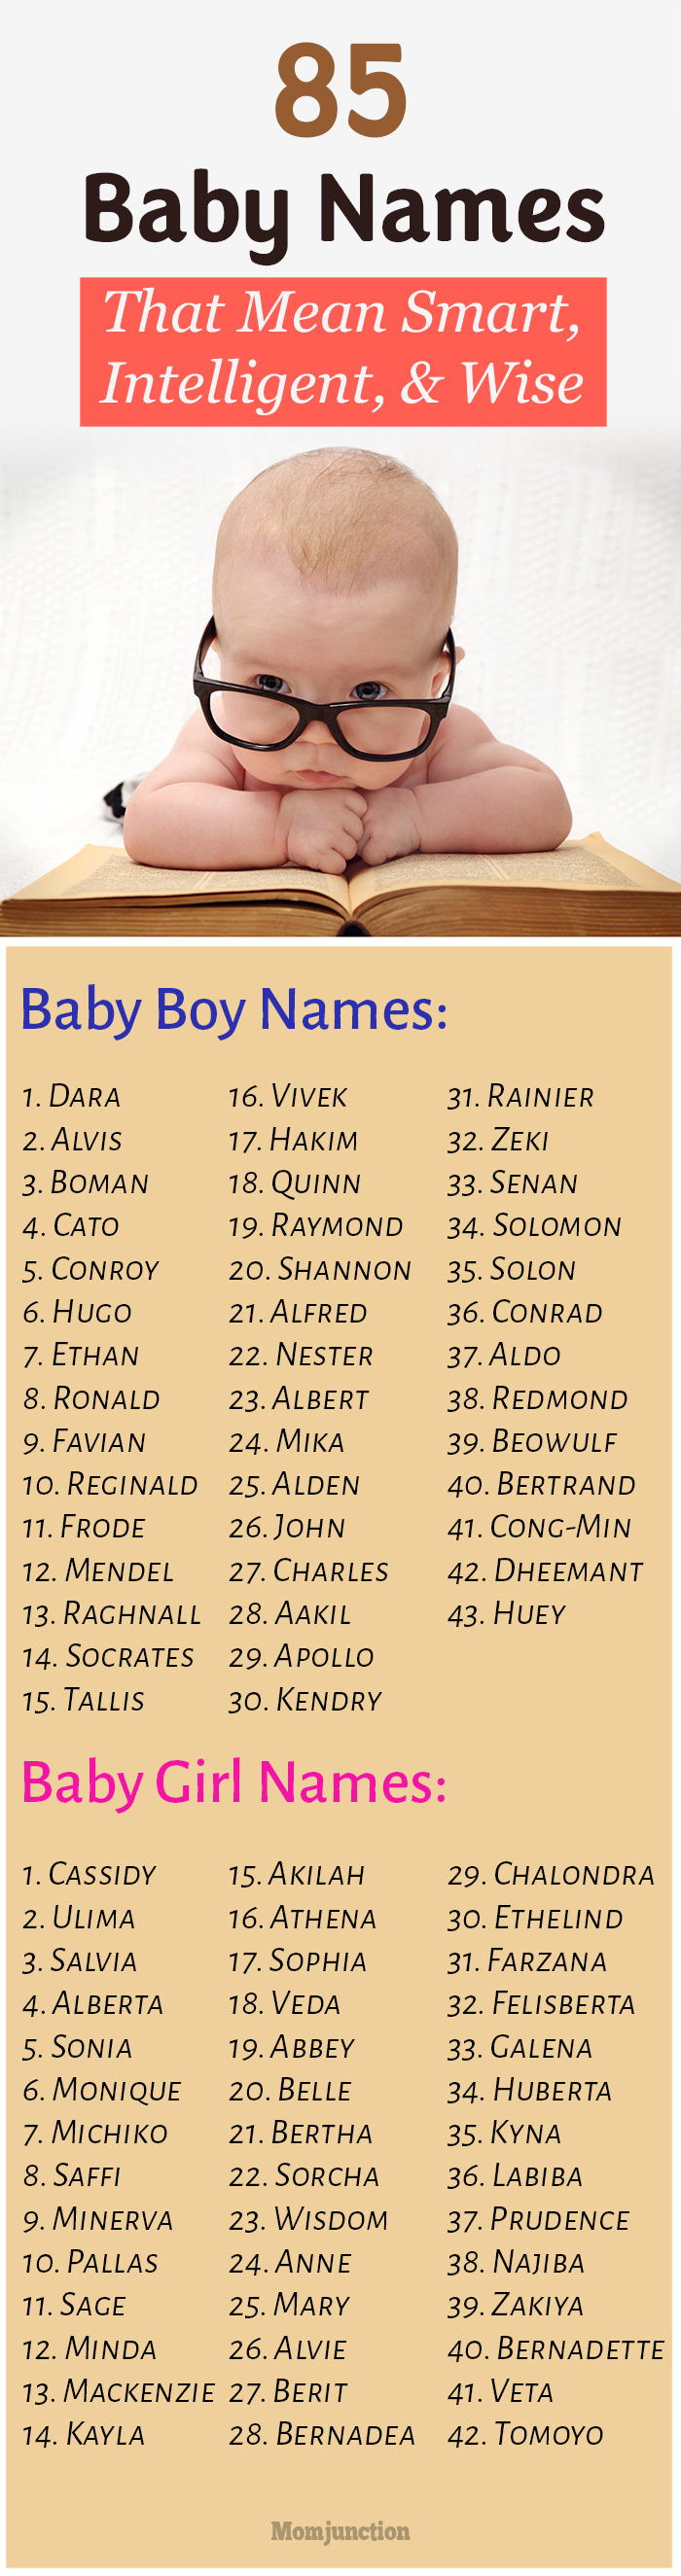 85 Unique Intelligent, Wise And Smart Baby Names